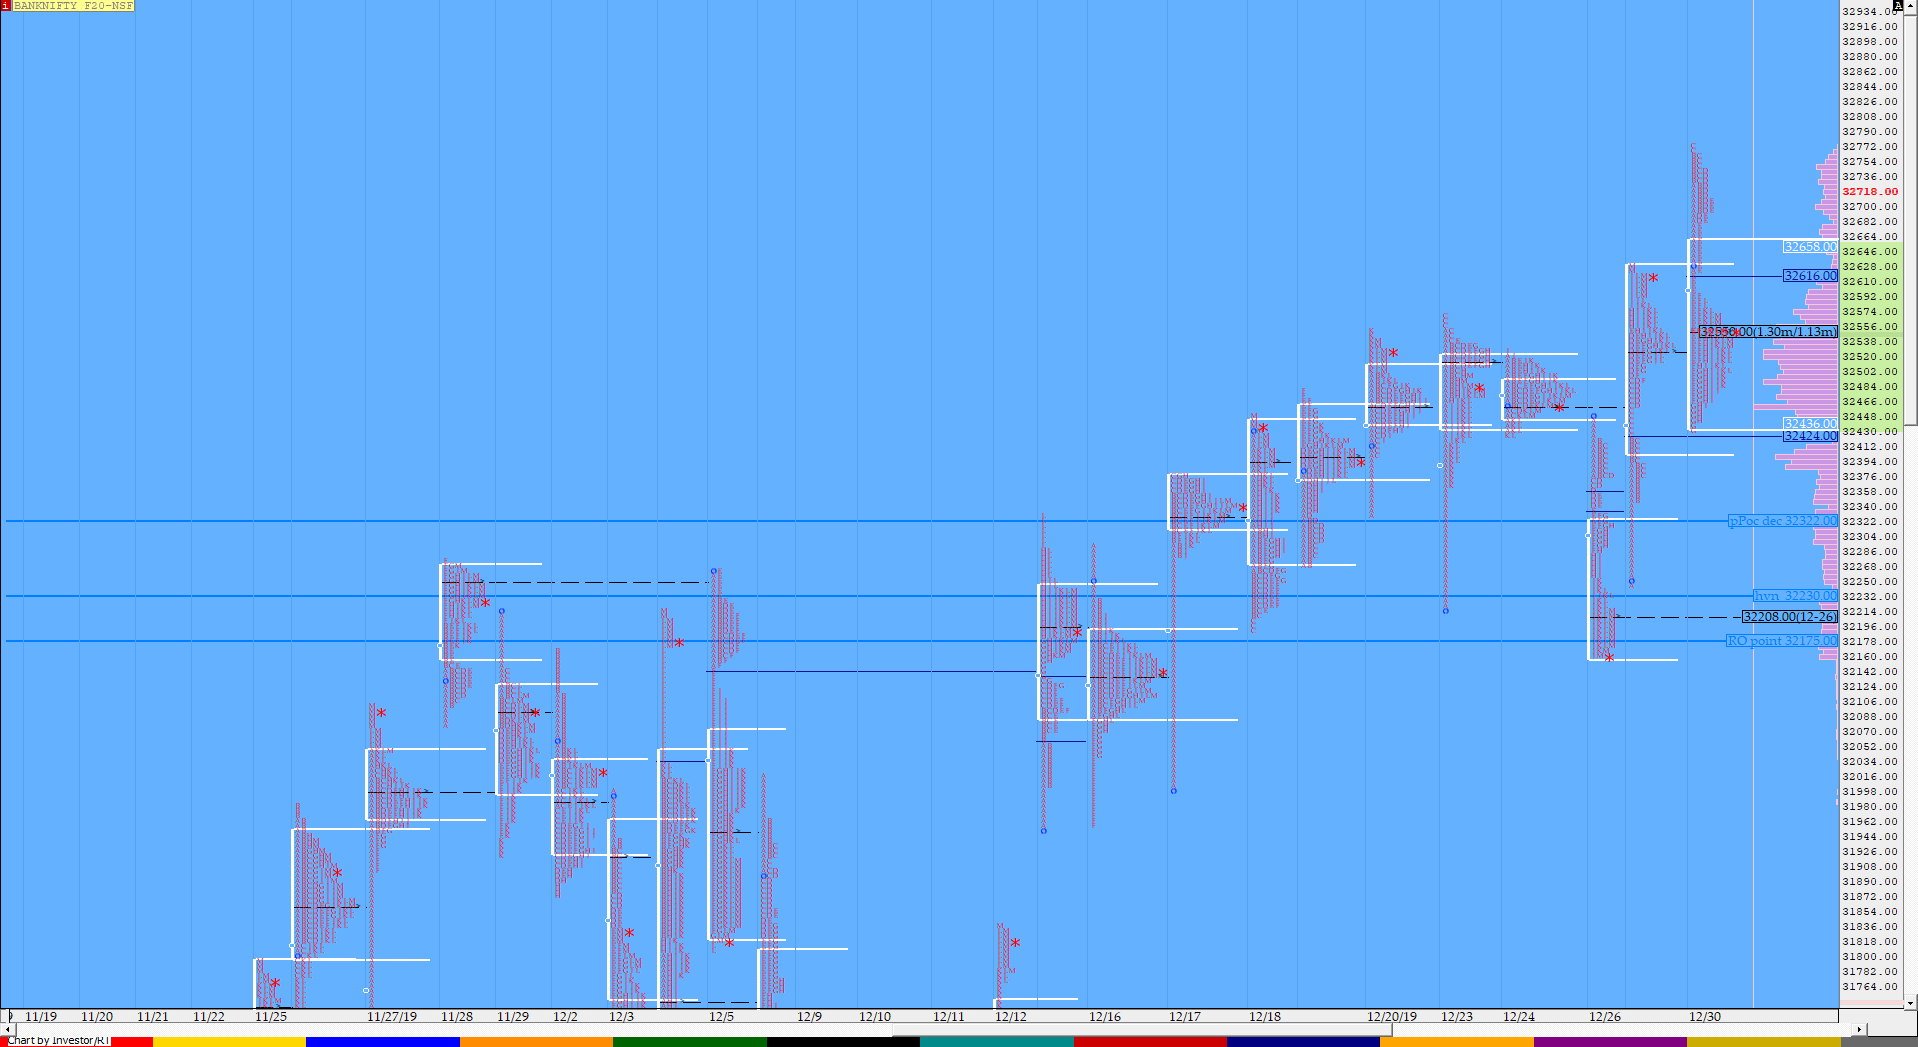 Bnf Compo1 17 Market Profile Analysis Dated 30Th December Banknifty Futures, Charts, Day Trading, Intraday Trading, Intraday Trading Strategies, Market Profile, Market Profile Trading Strategies, Nifty Futures, Order Flow Analysis, Support And Resistance, Technical Analysis, Trading Strategies, Volume Profile Trading